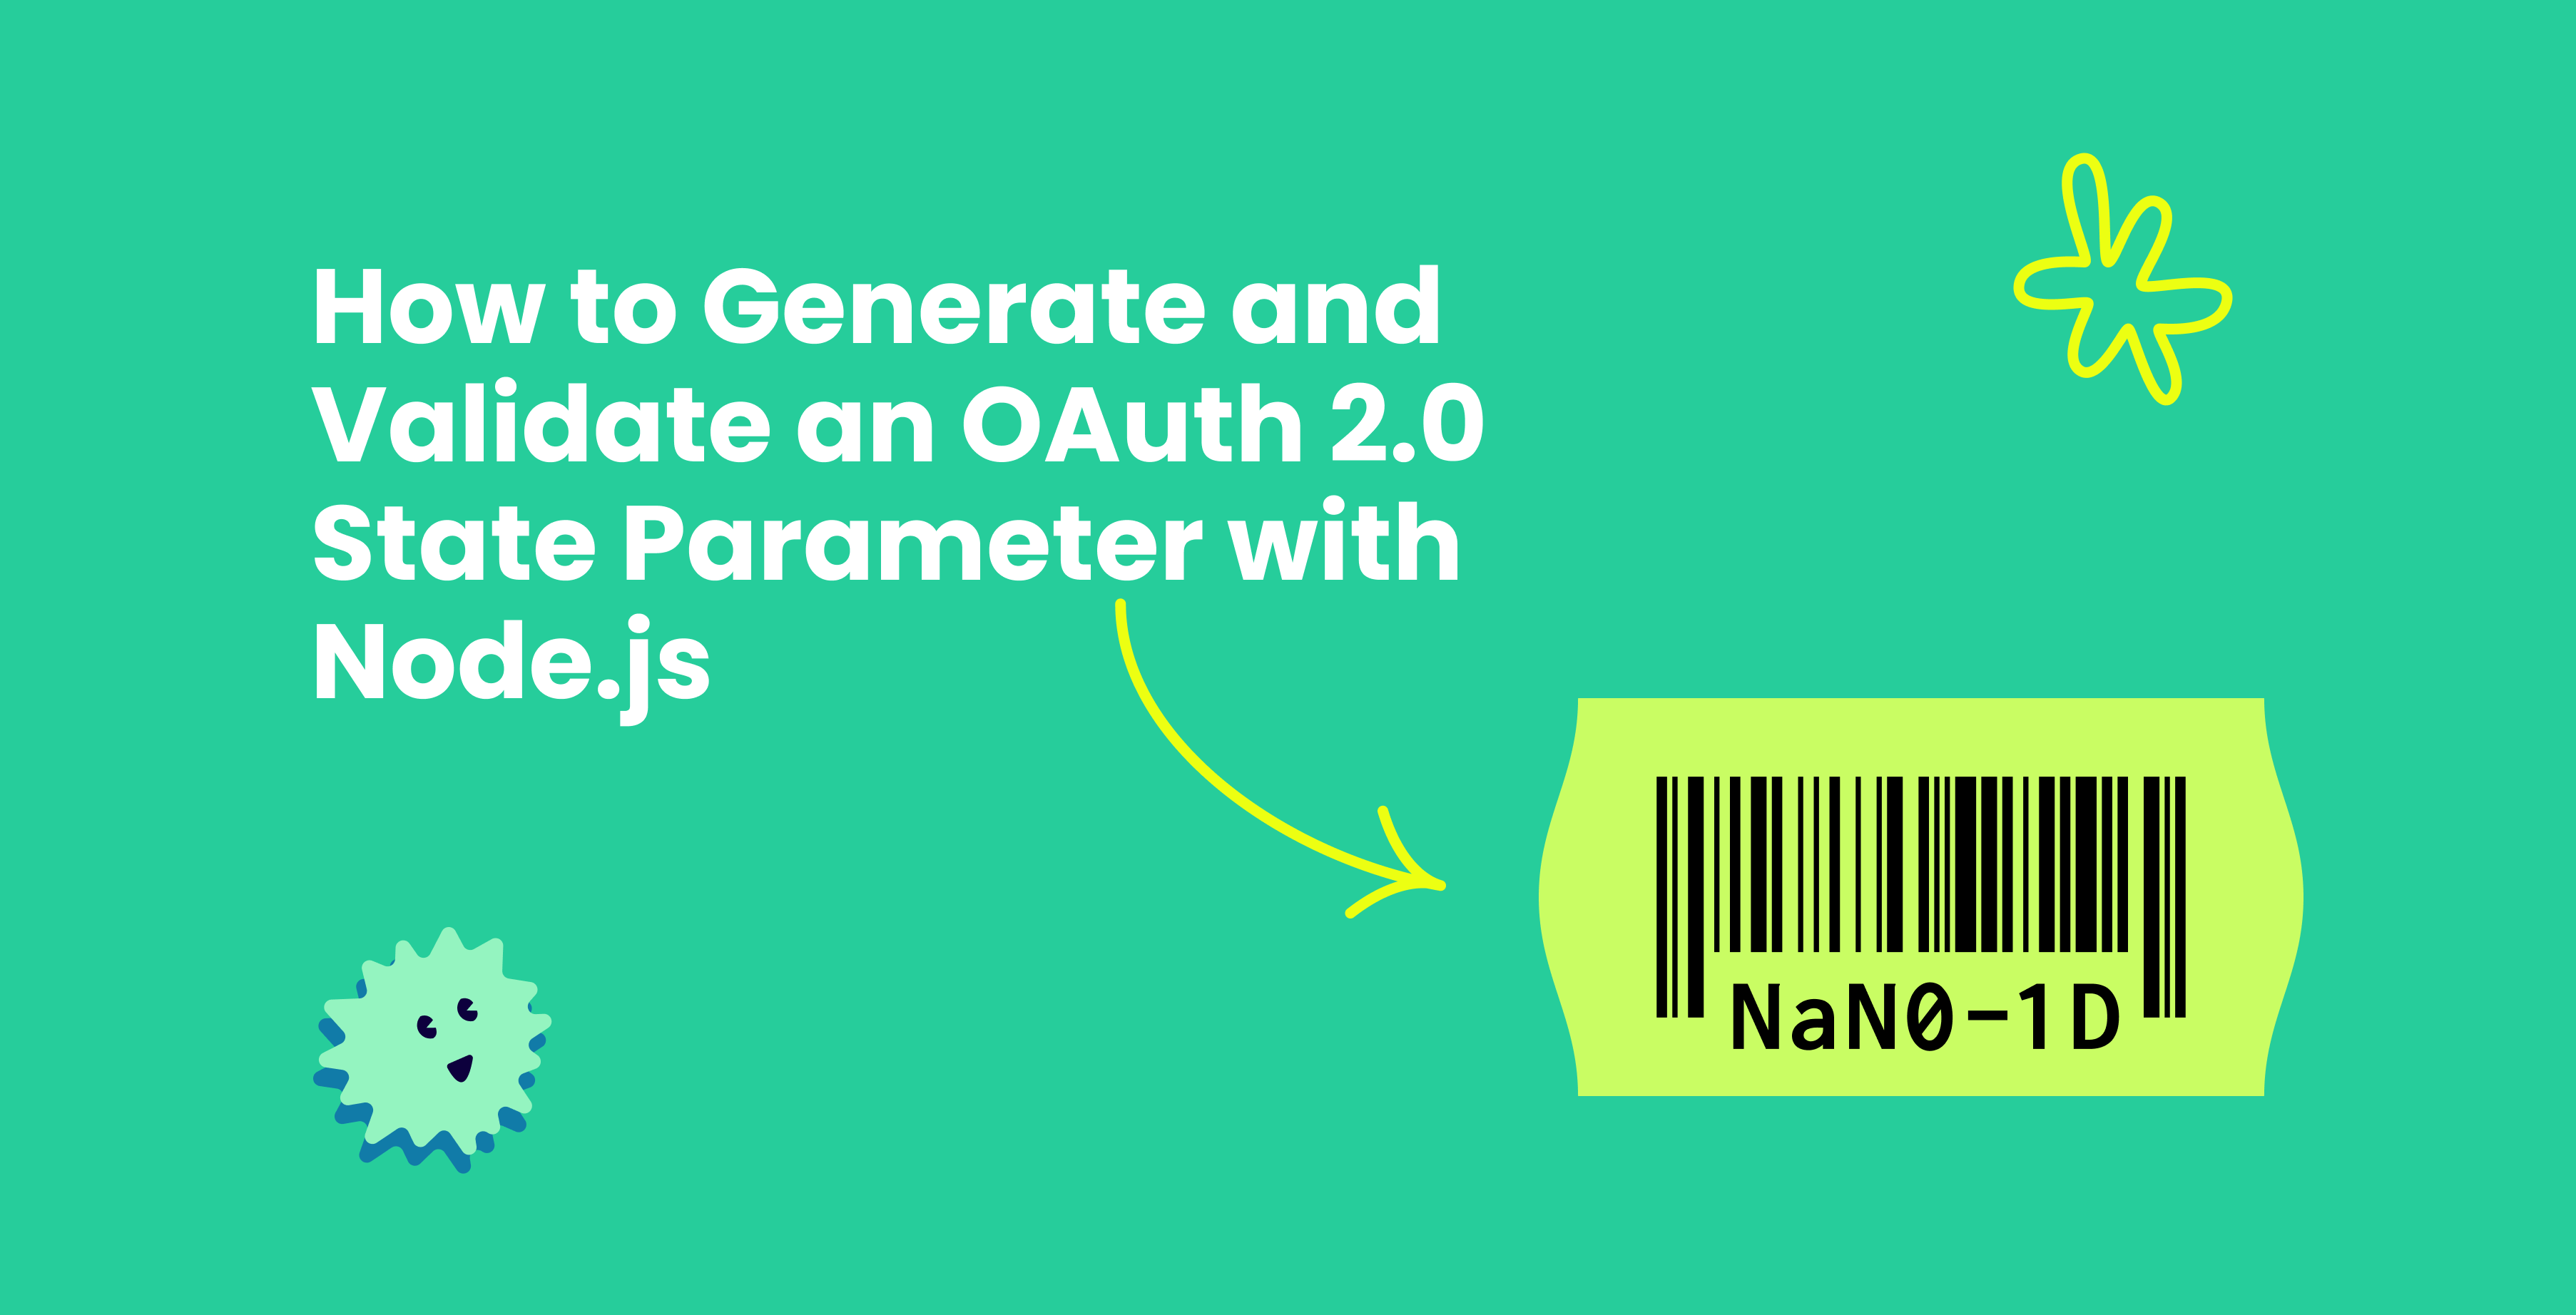 How to Generate and Validate an OAuth 2.0 State Parameter with Node.js